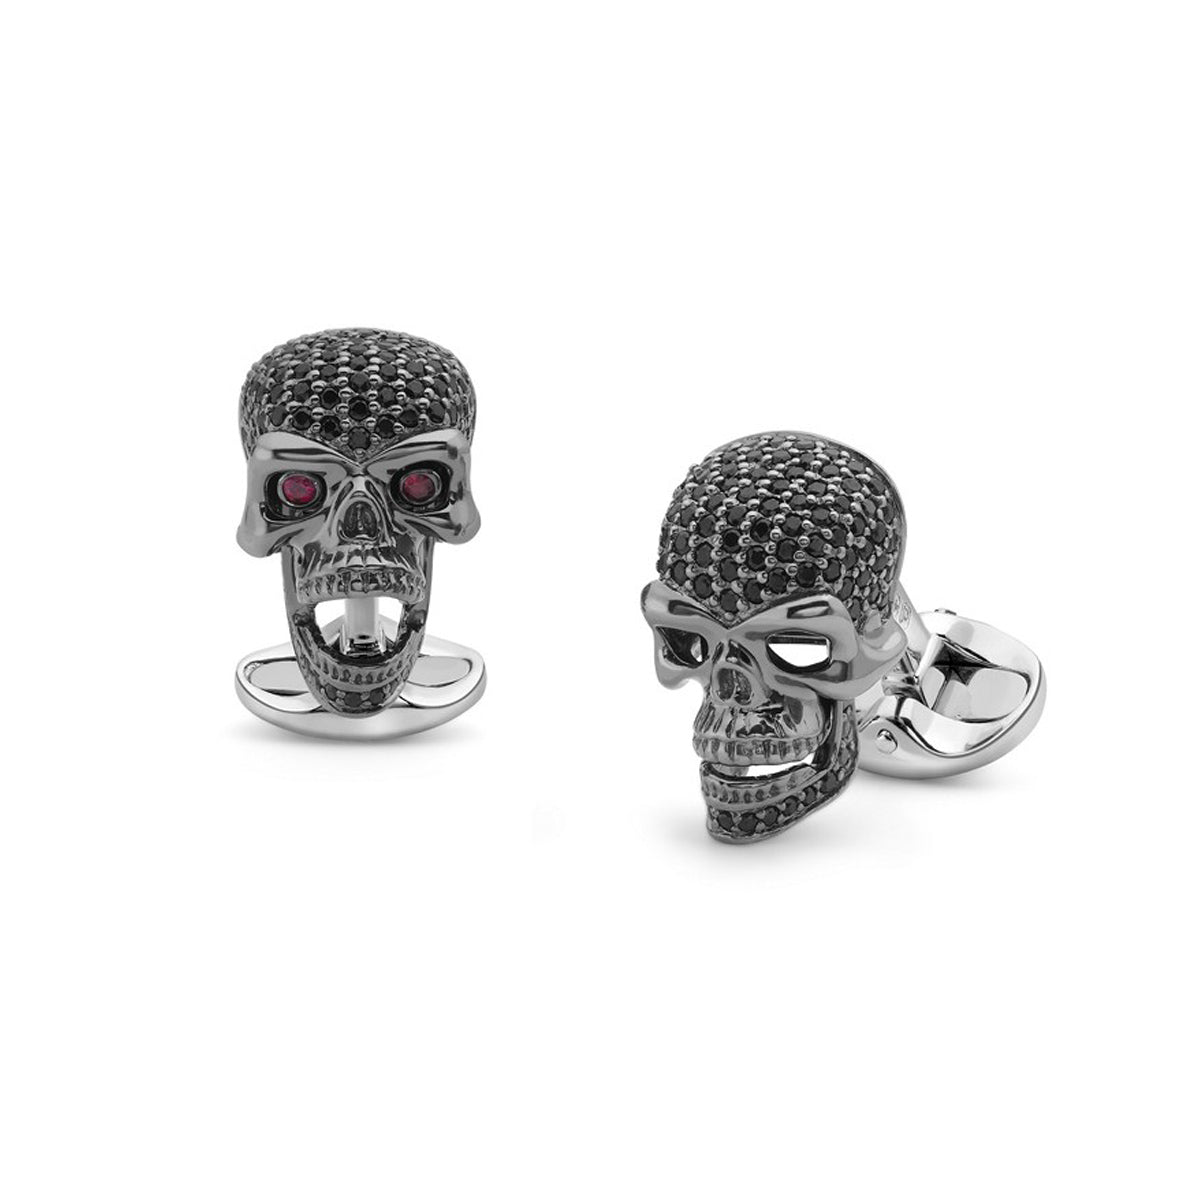 A pair of Black Spinel and Ruby Skull Head Cufflinks